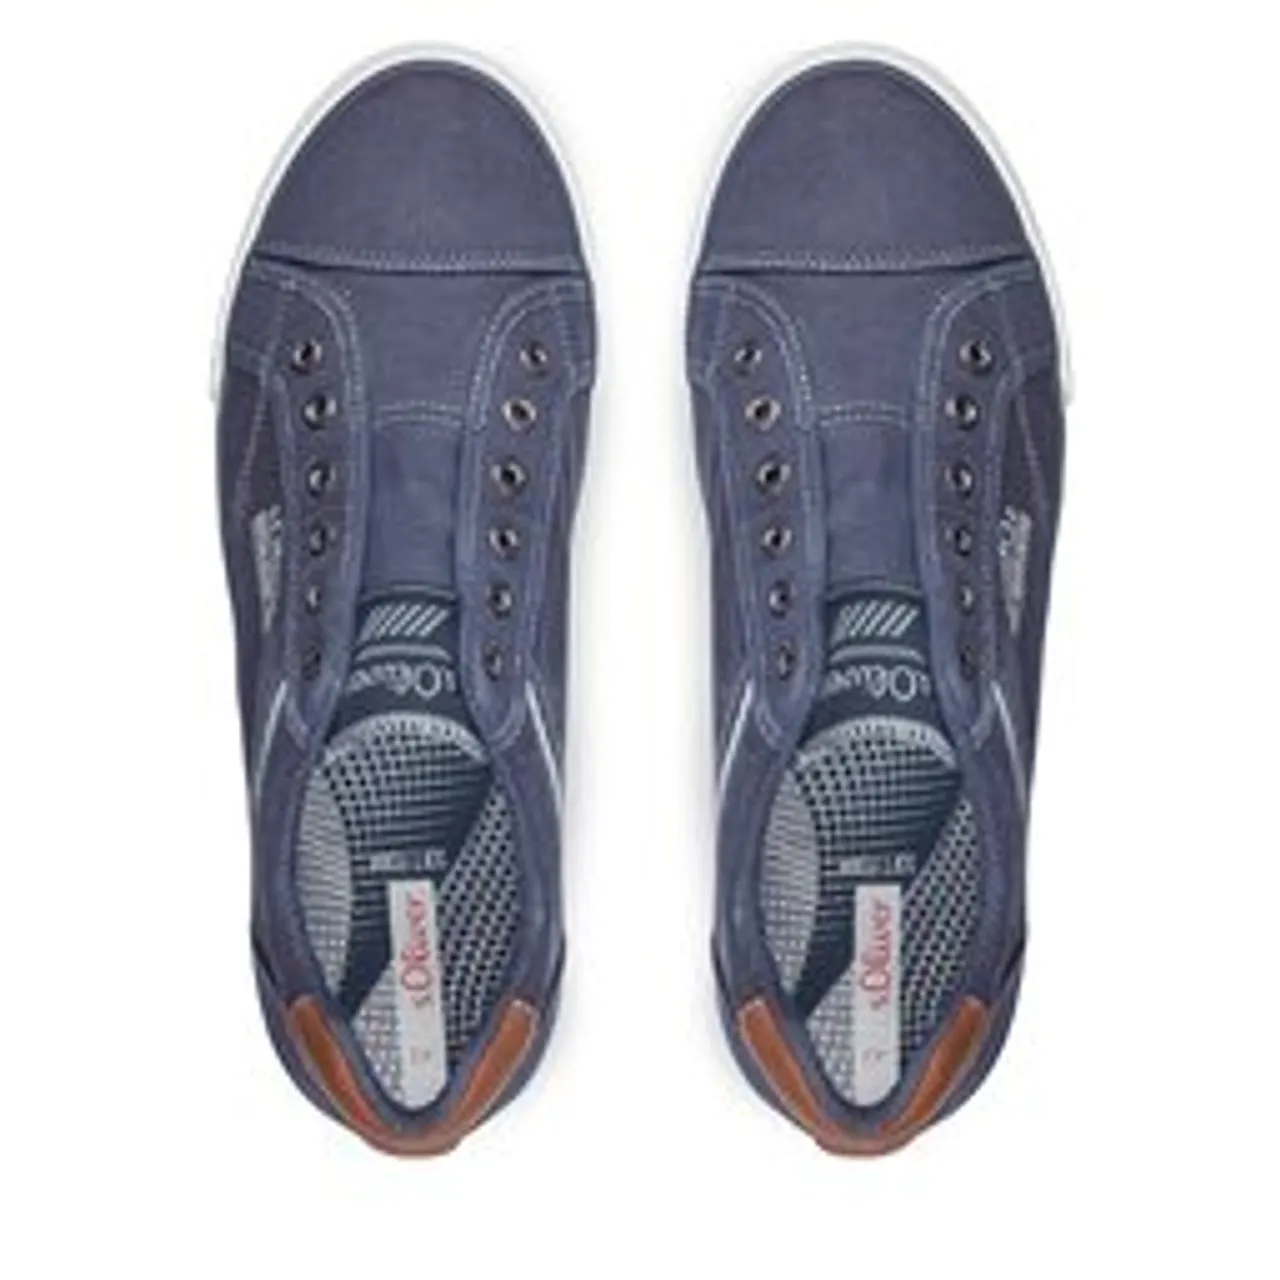 Sneakers aus Stoff s.Oliver 5-14603-42 Navy 805